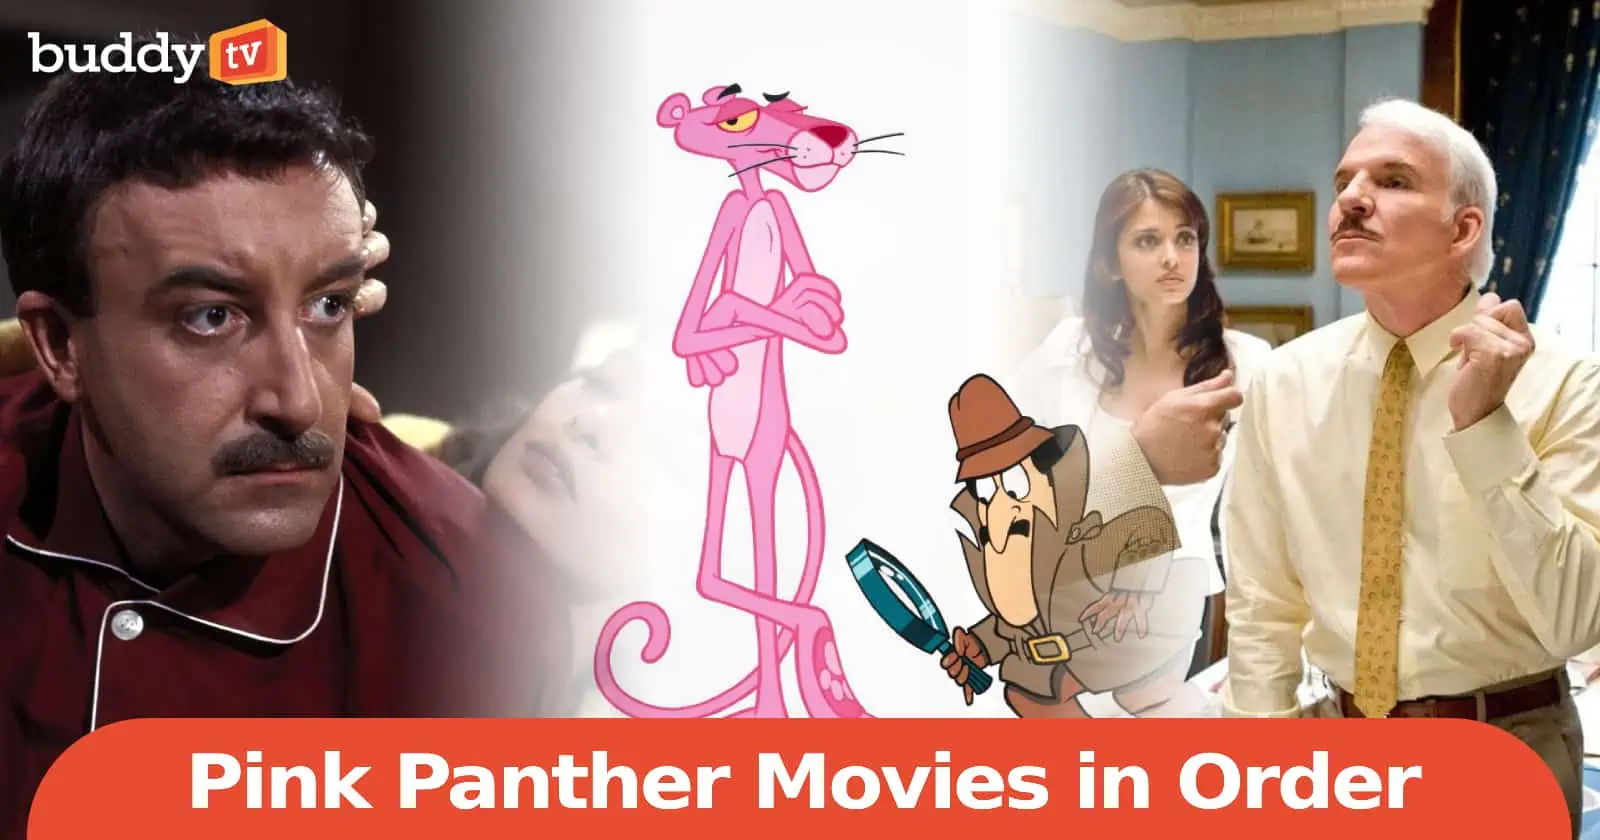 All the Pink Panther Movies in Order